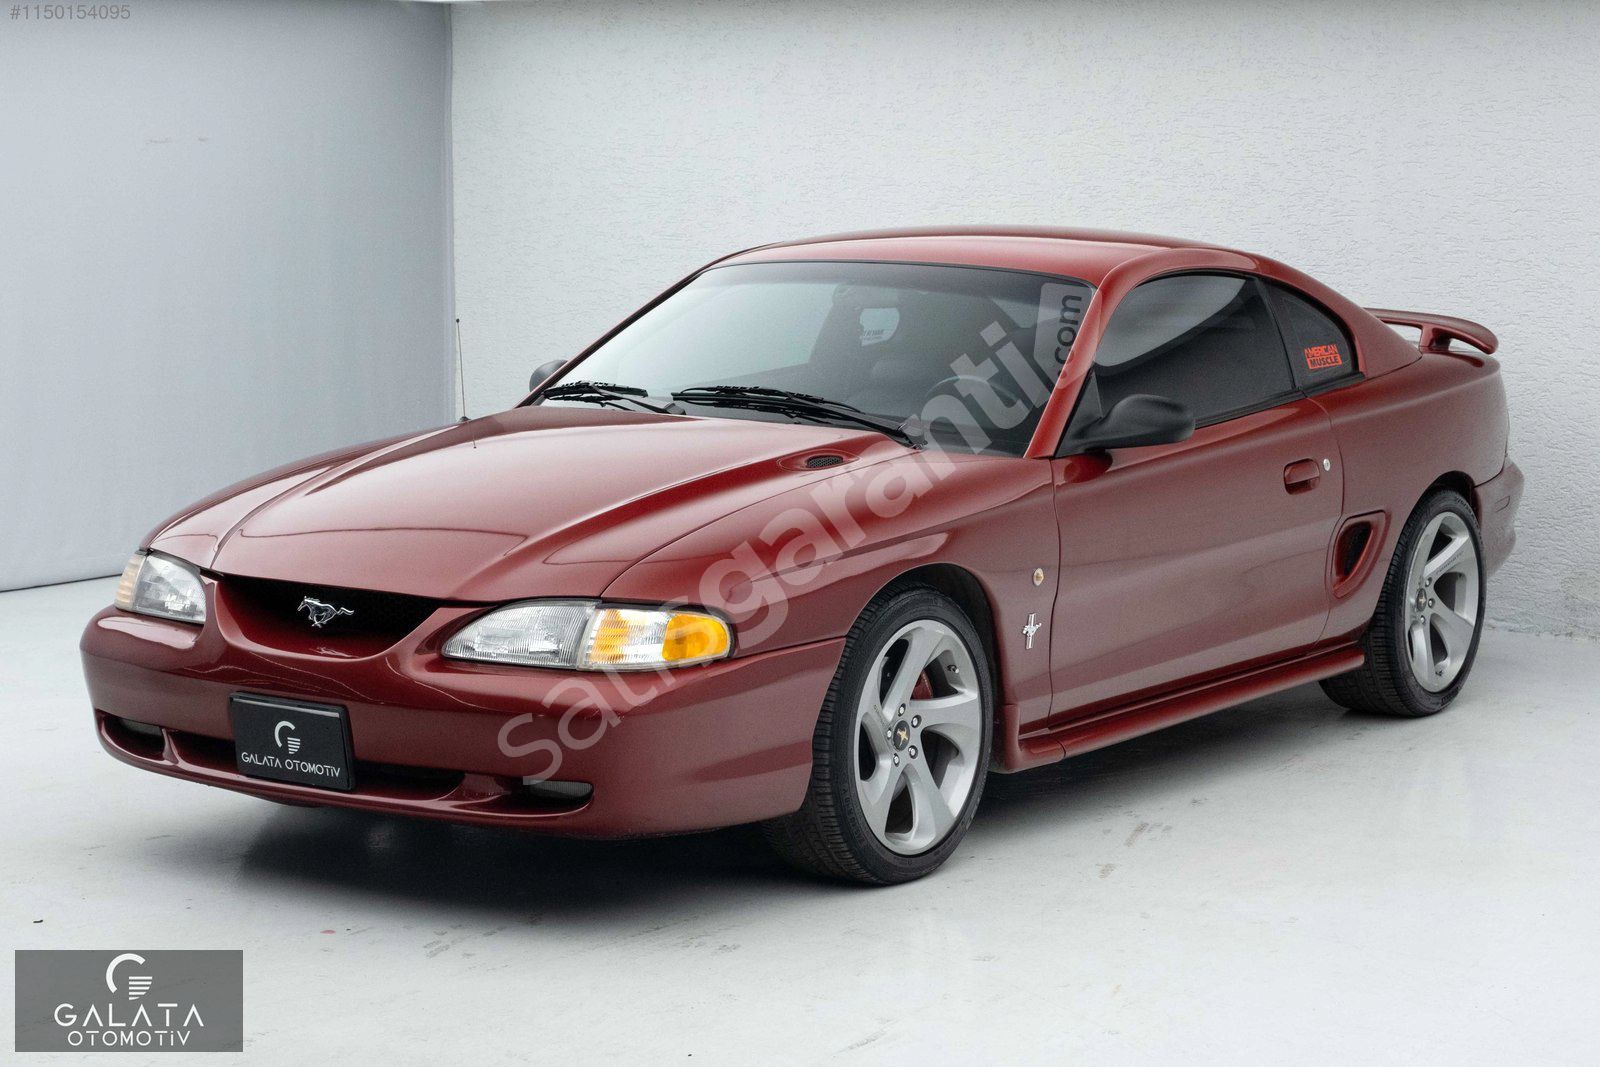 'GALATA' 1998 FORD MUSTANG 4.6 GT